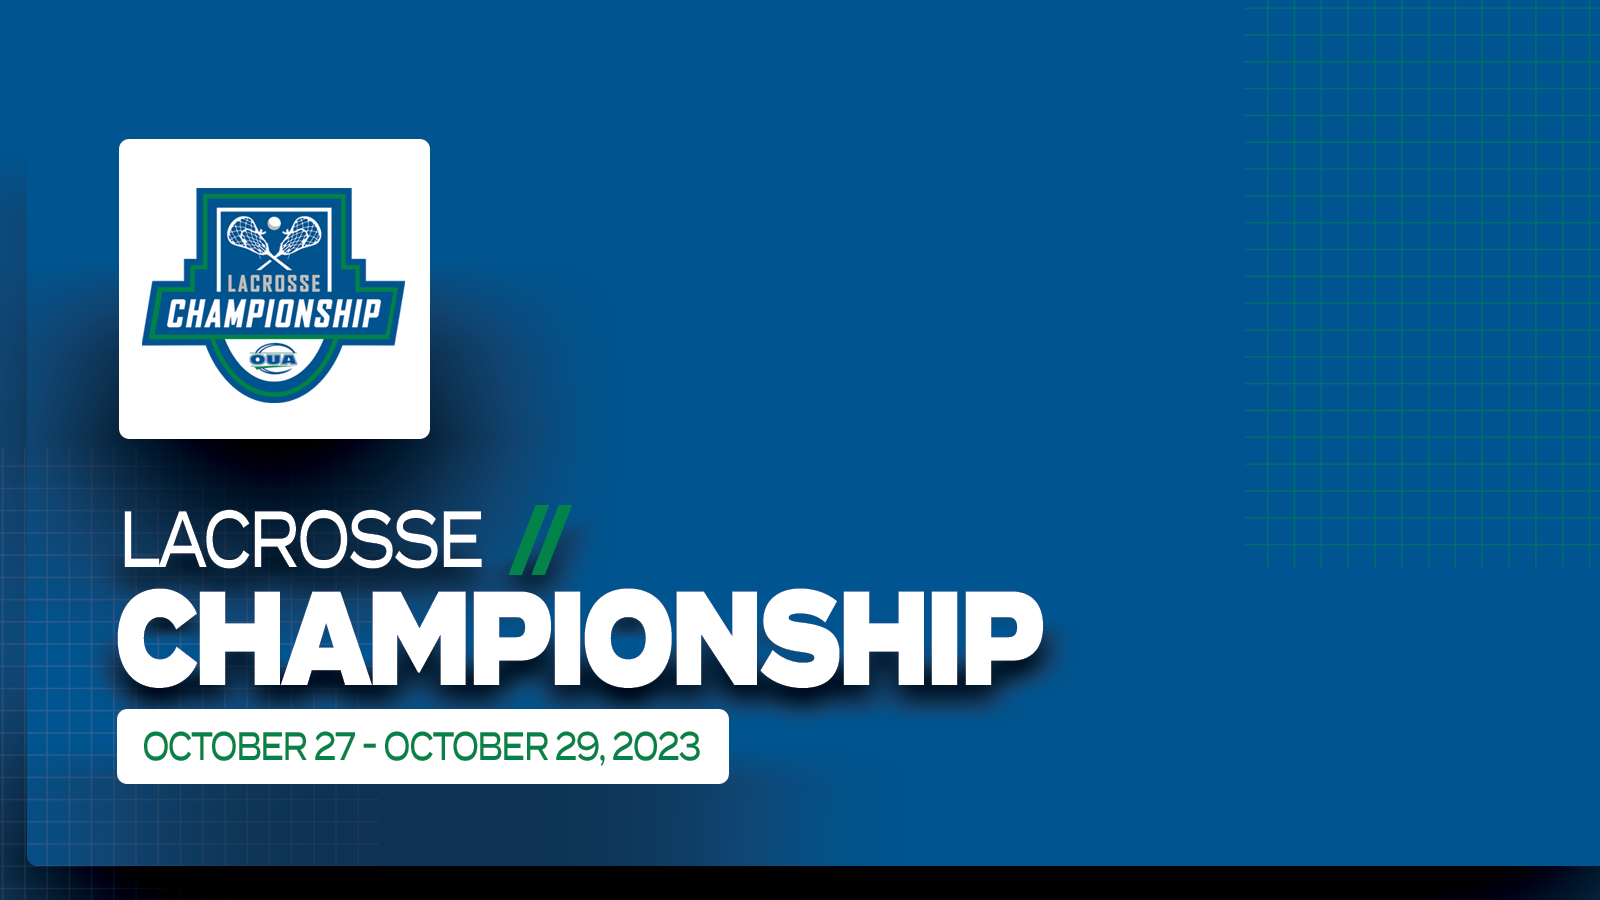 Graphic on predominantly blue background featuring white and green text that reads Lacrosse Championship, October 27 - October 29) and the Lacrosse Championship logo placed above it